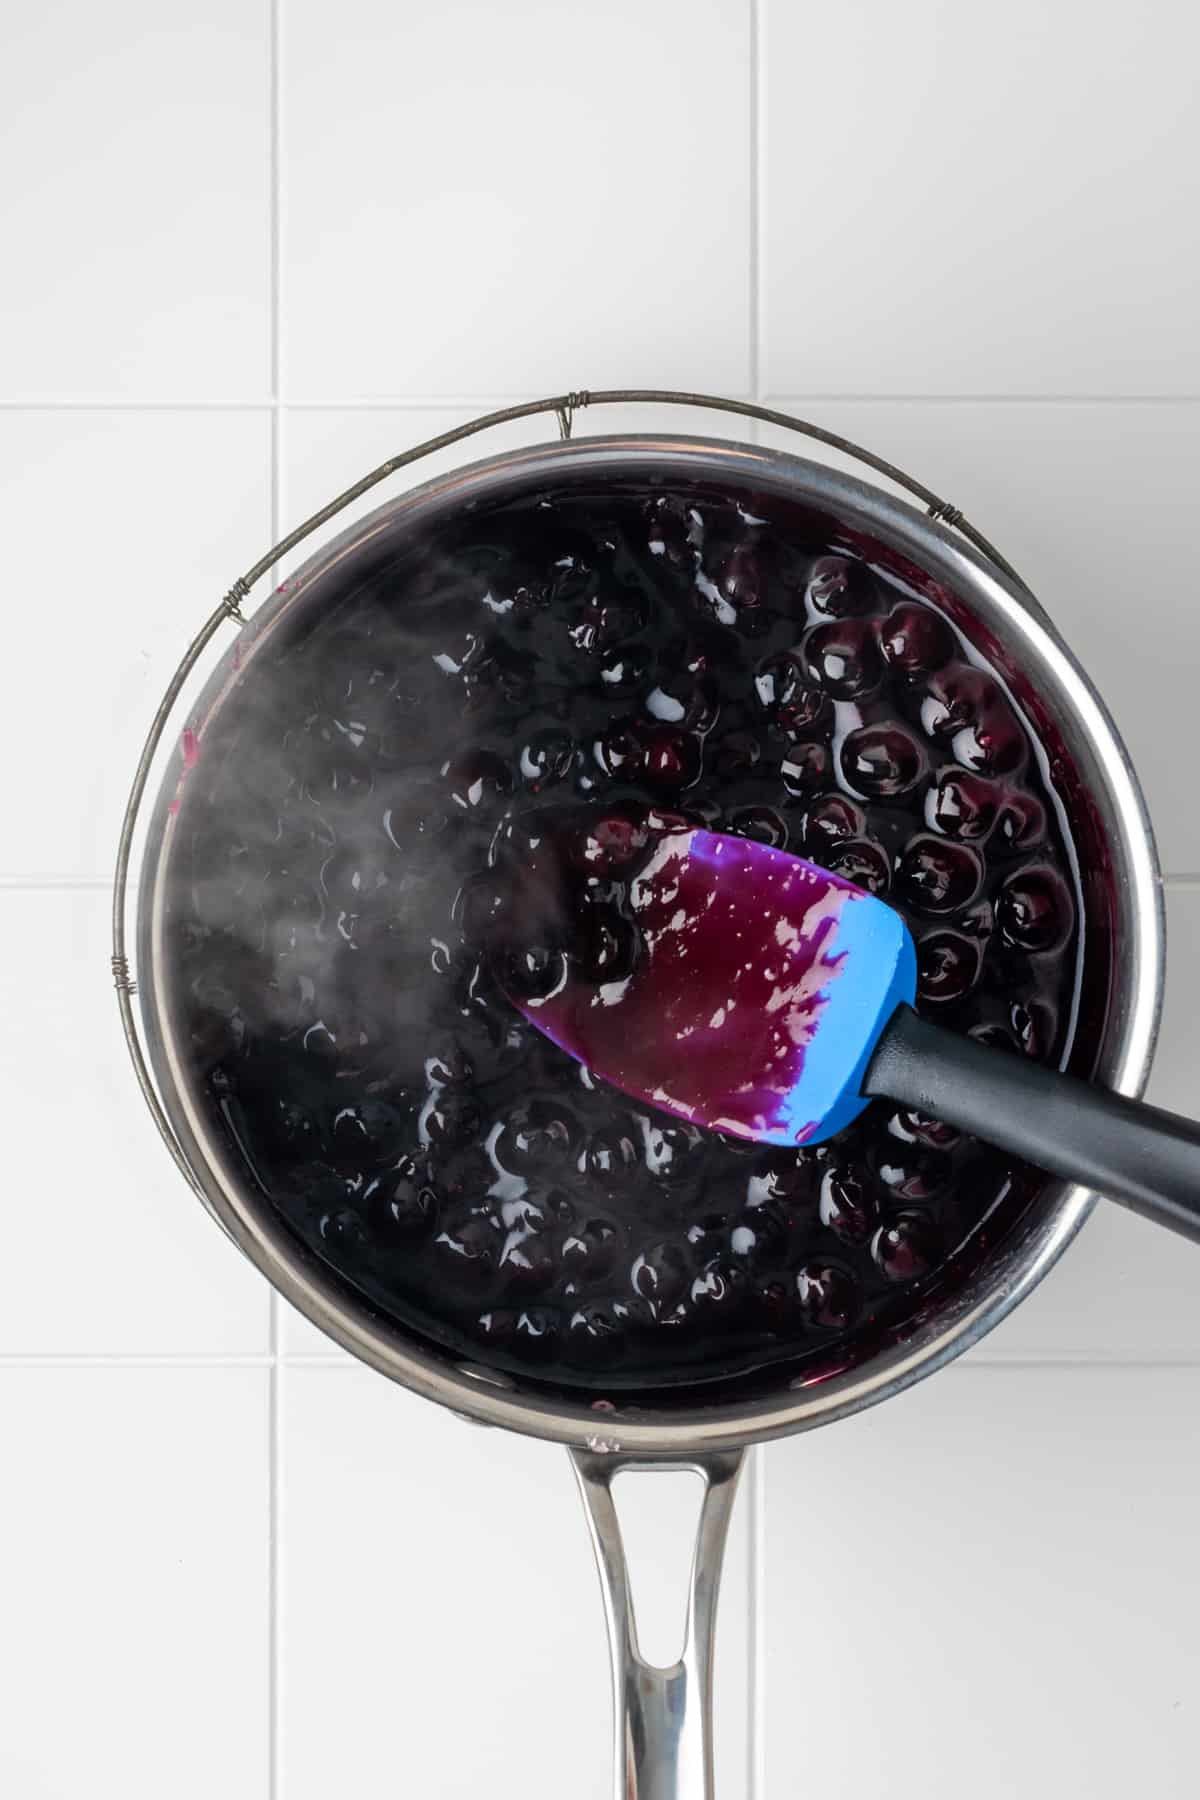 Thickened blueberry sauce shown coating a spatula.